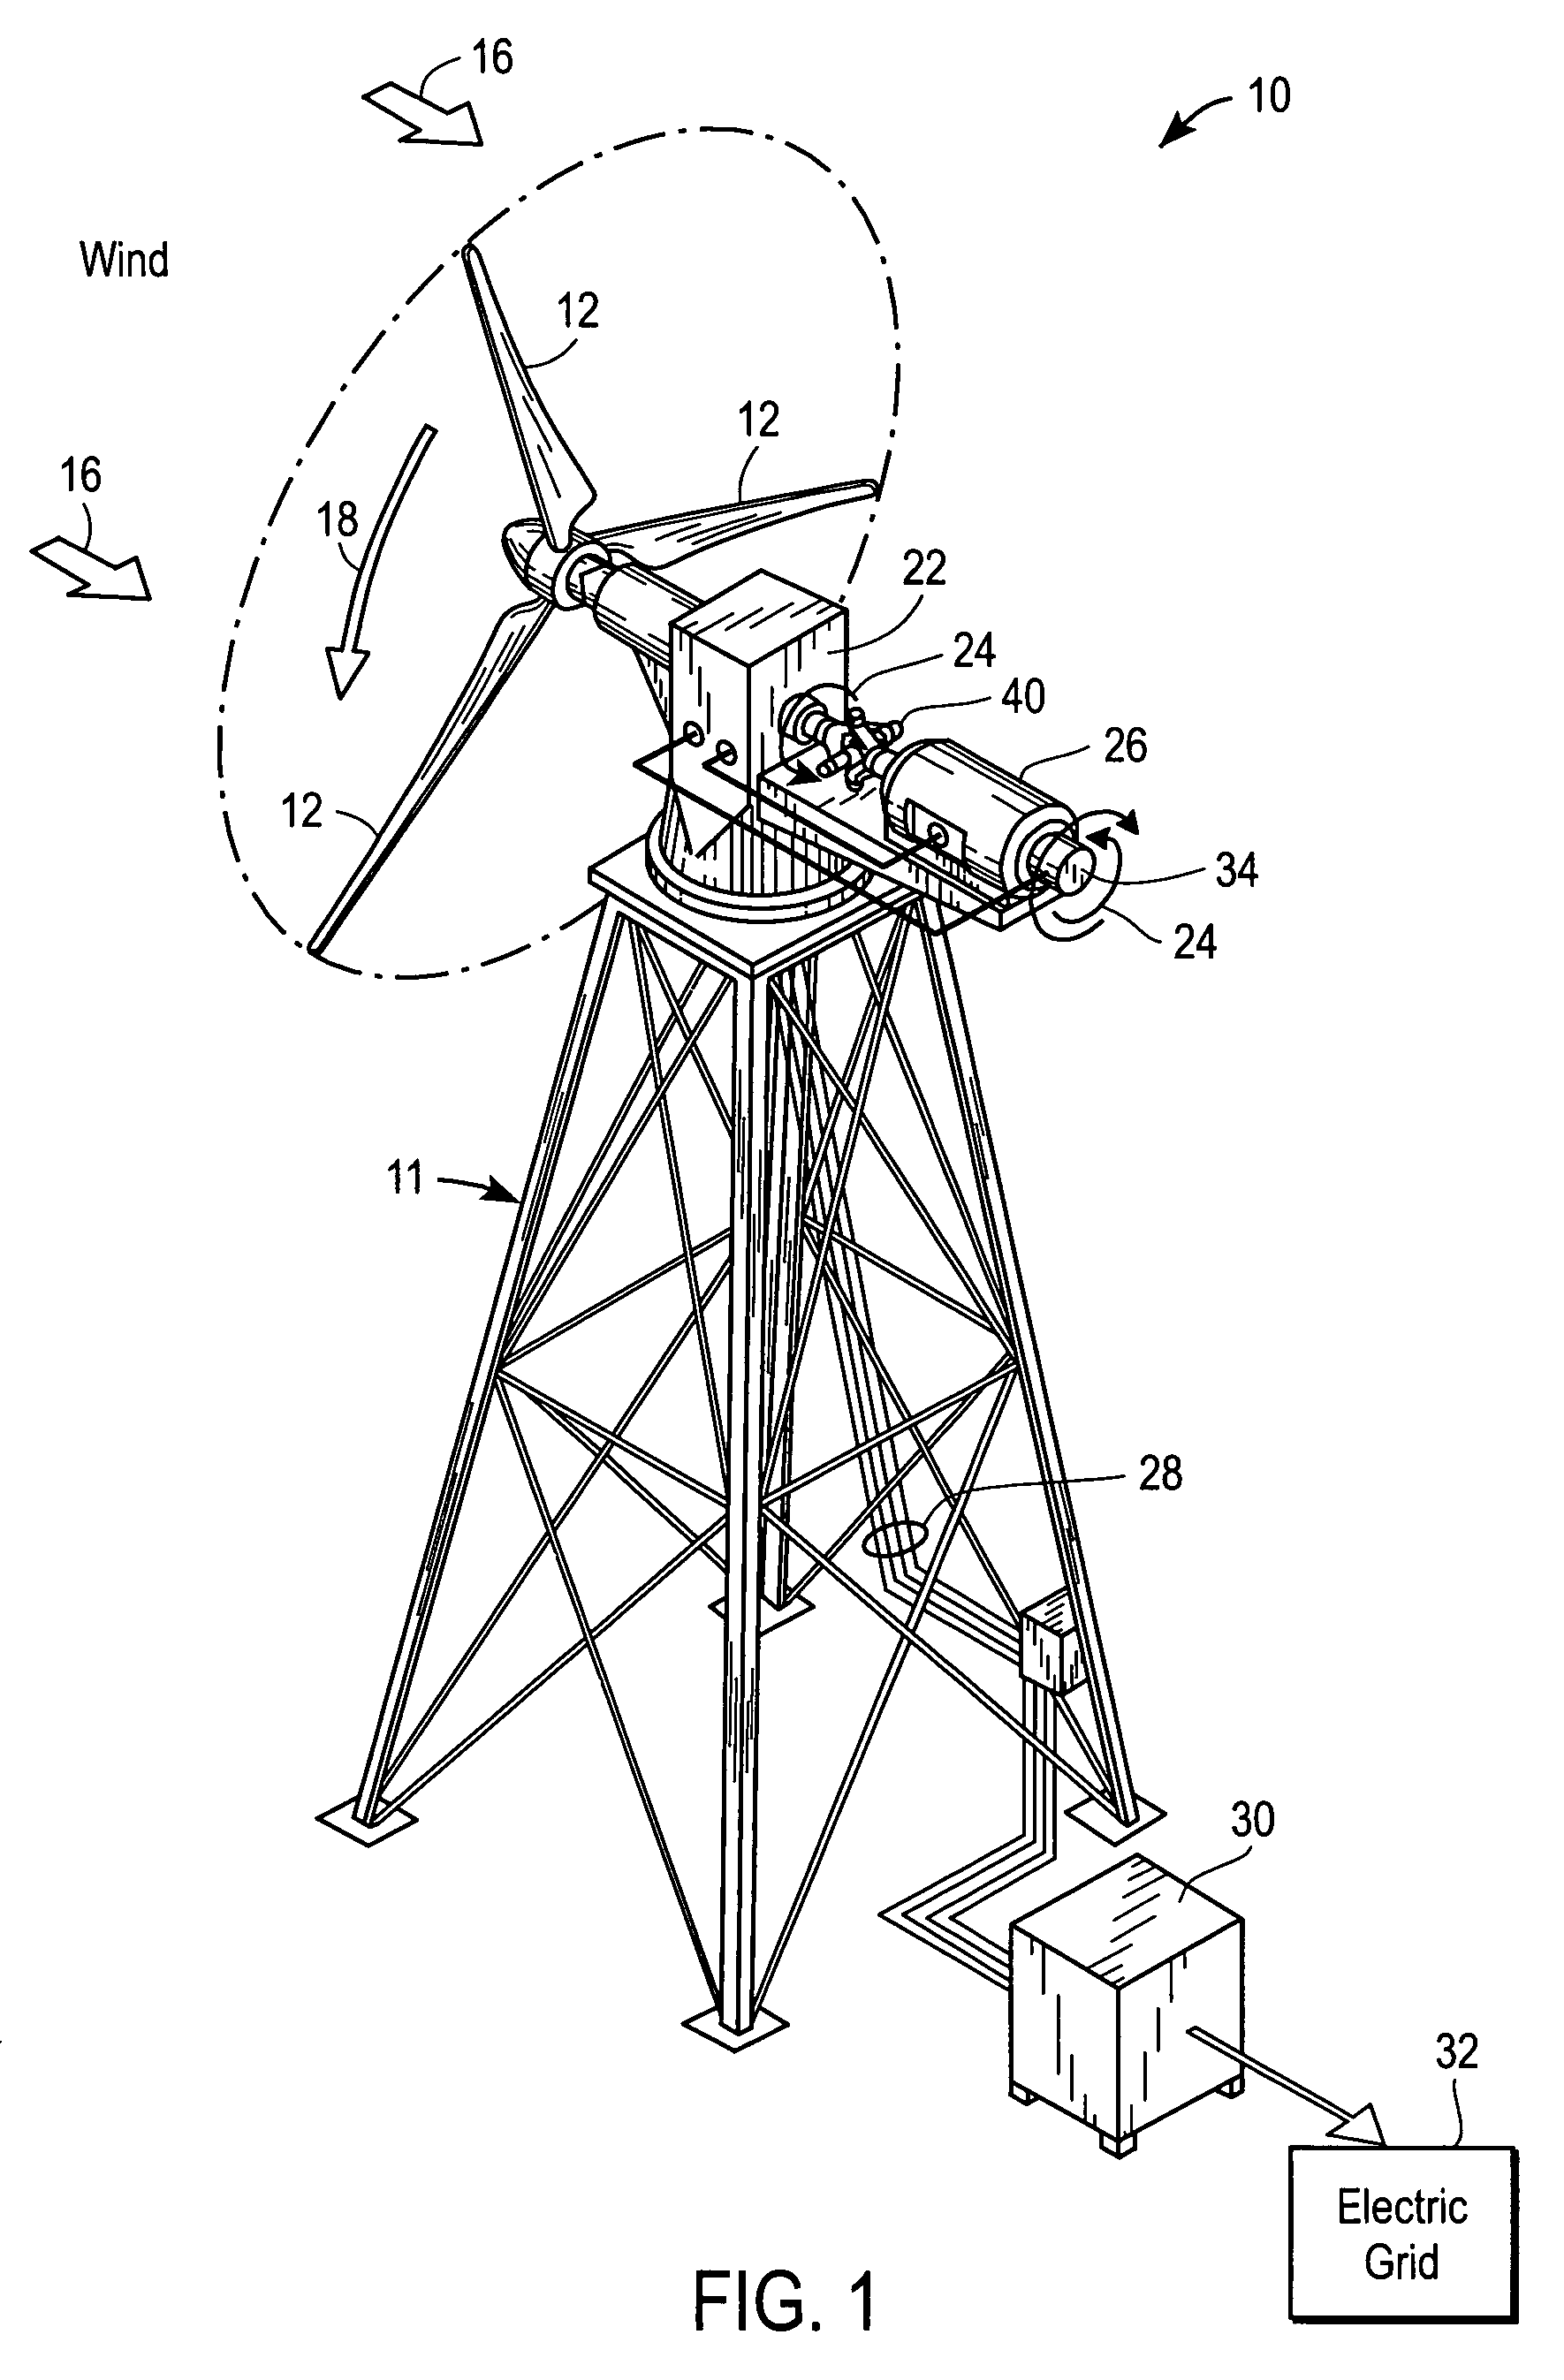 Deicing device for wind turbine blades